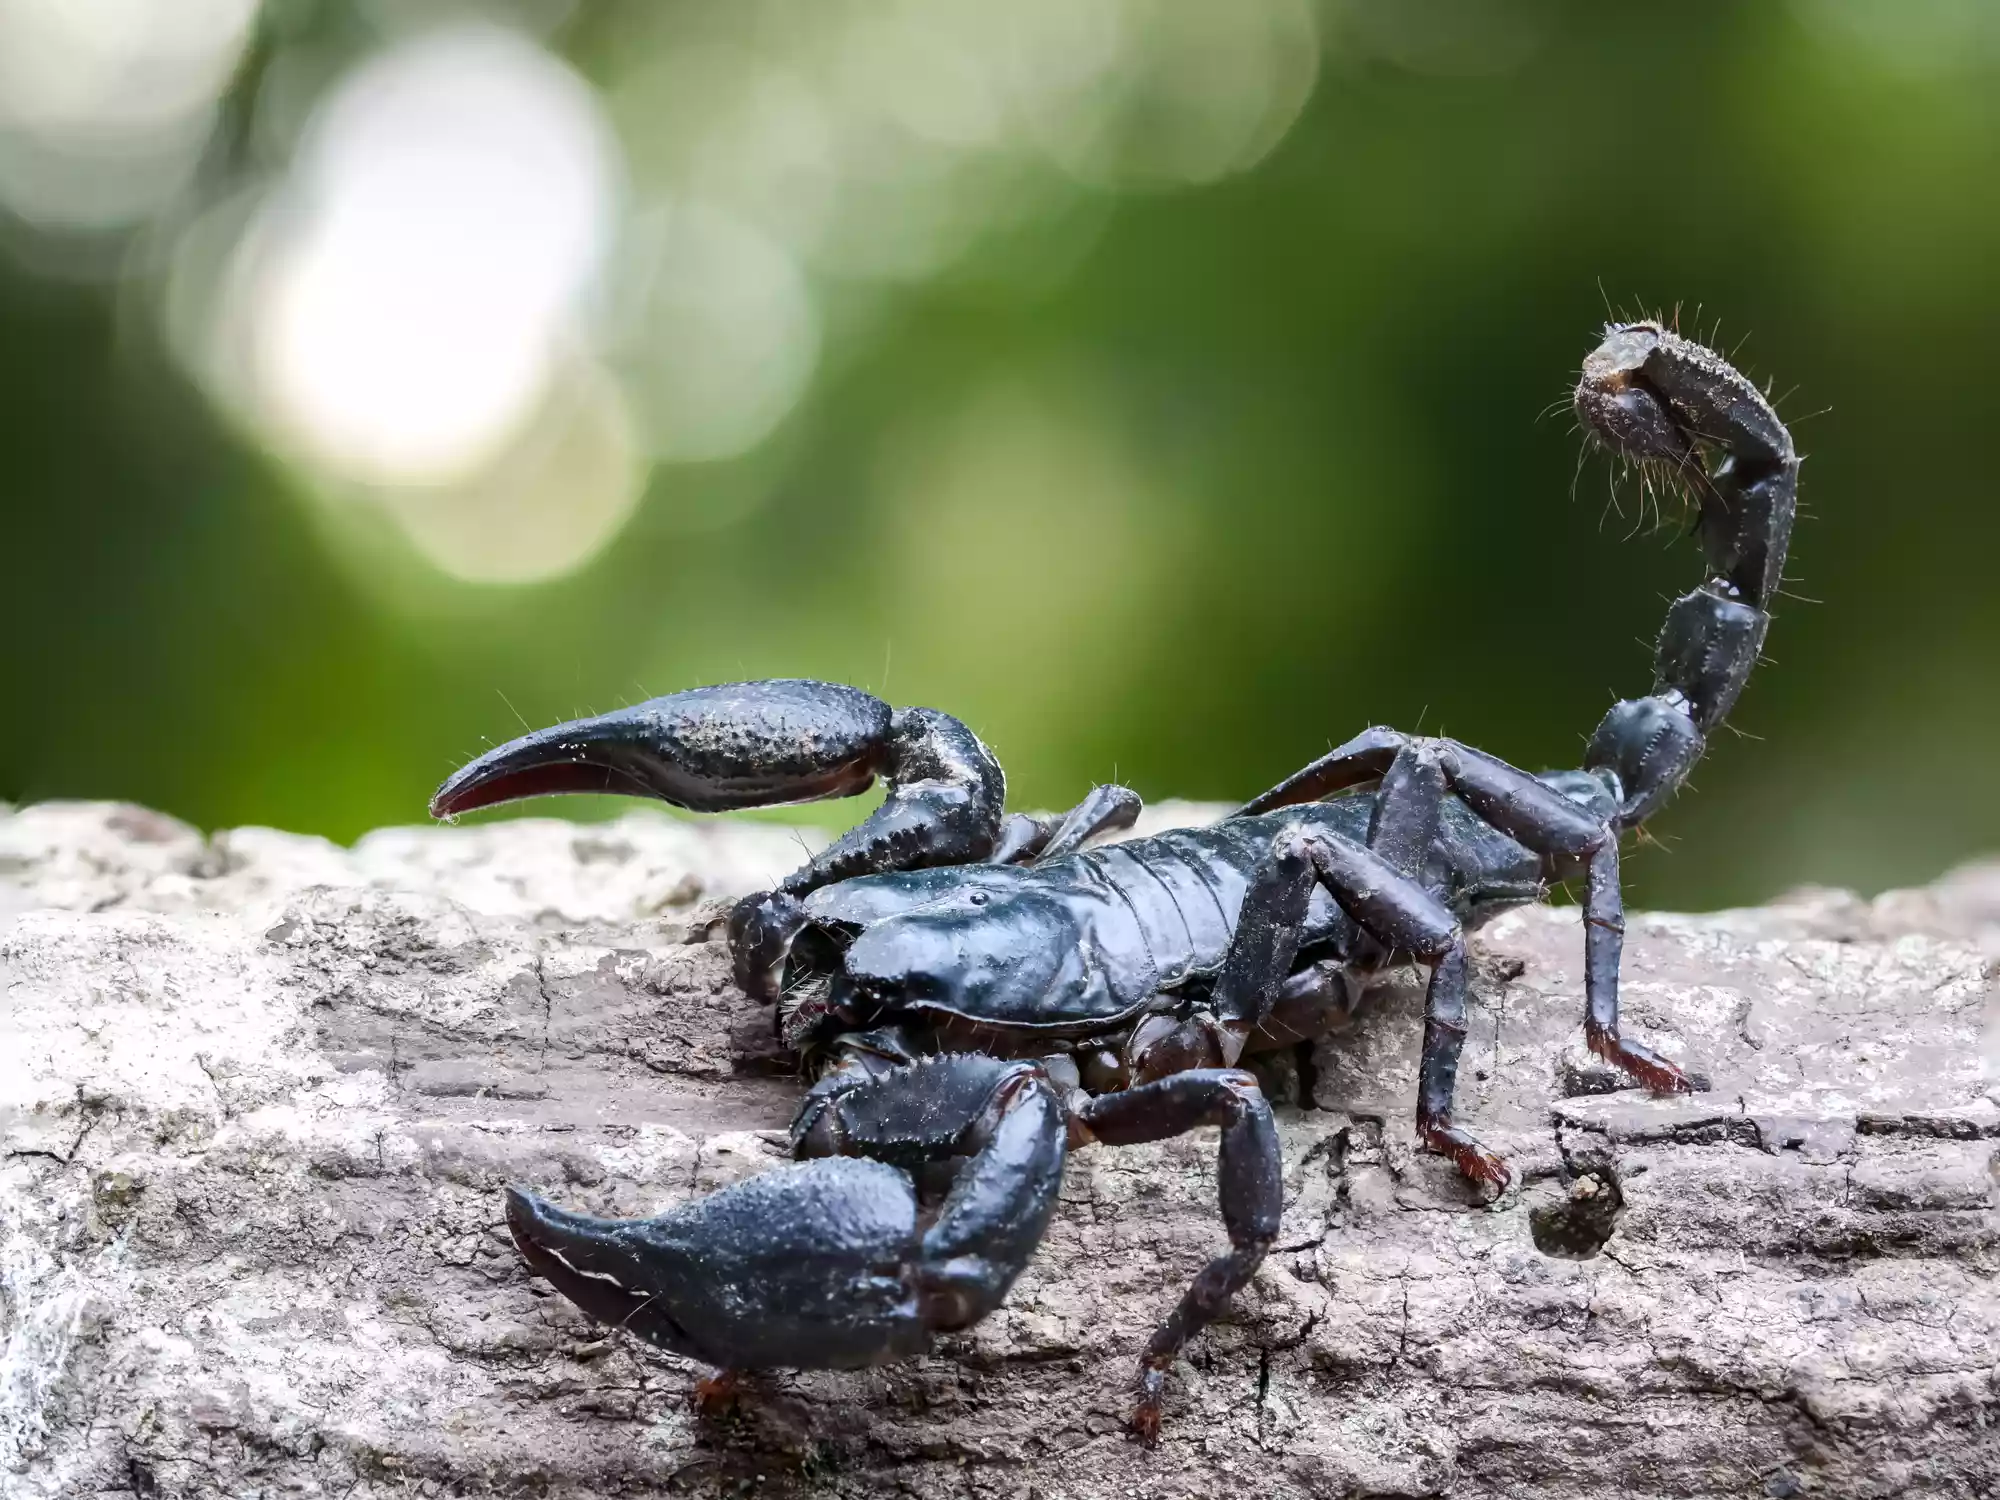 A dark brown scorpion with a curled tail on a log